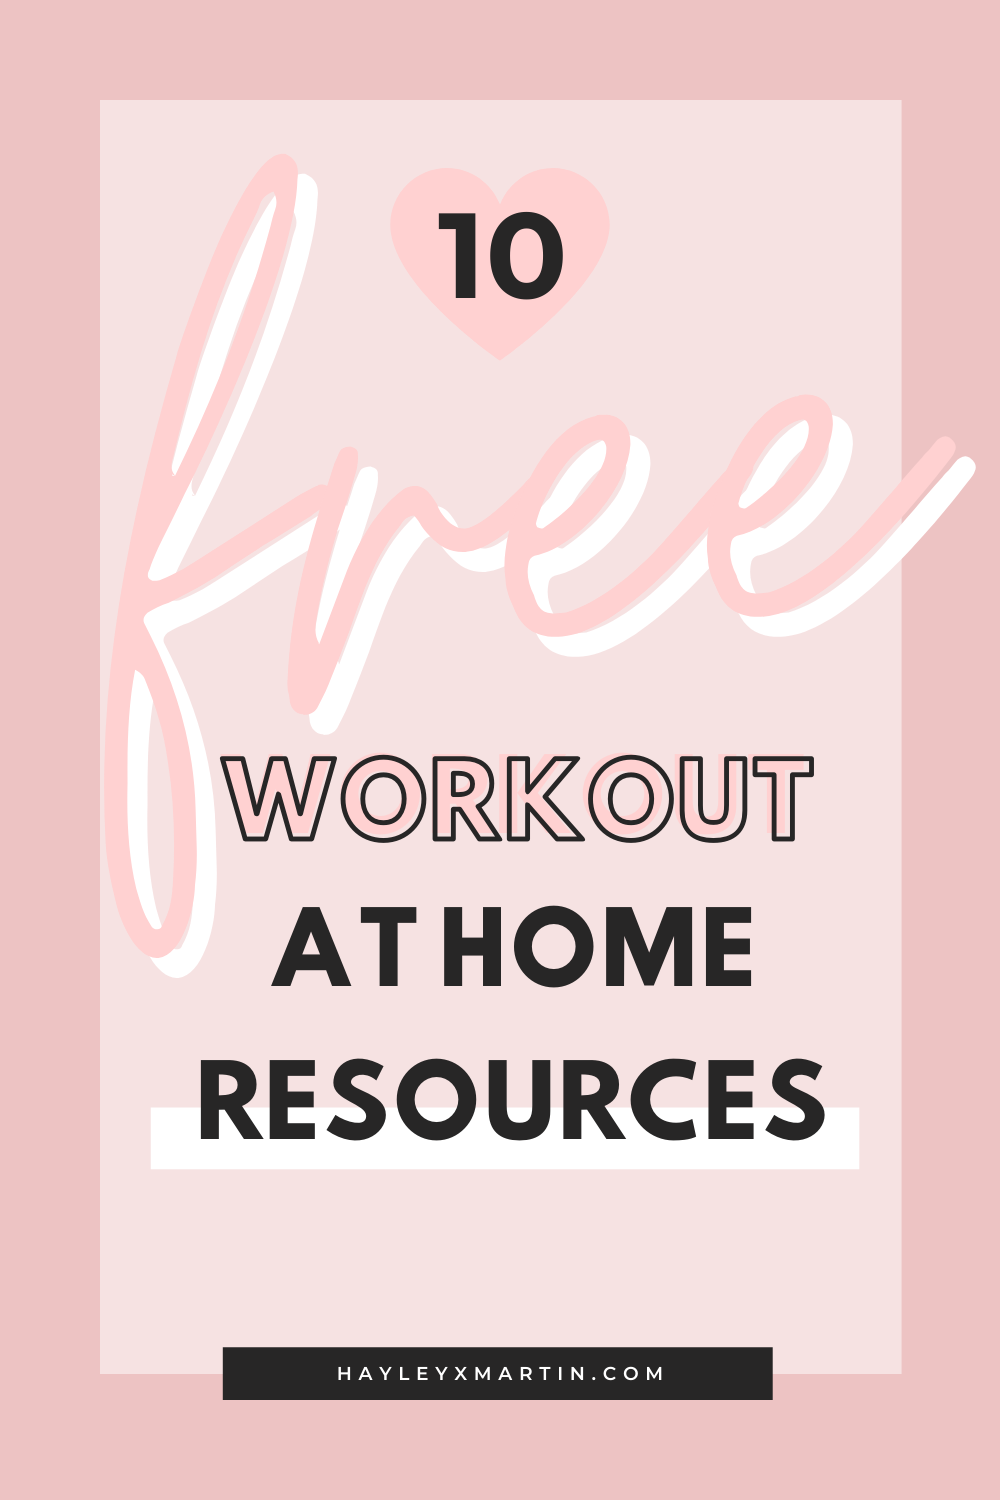 10 FREE WORKOUT AT HOME RESOURCES | HAYLEYXMARTIN